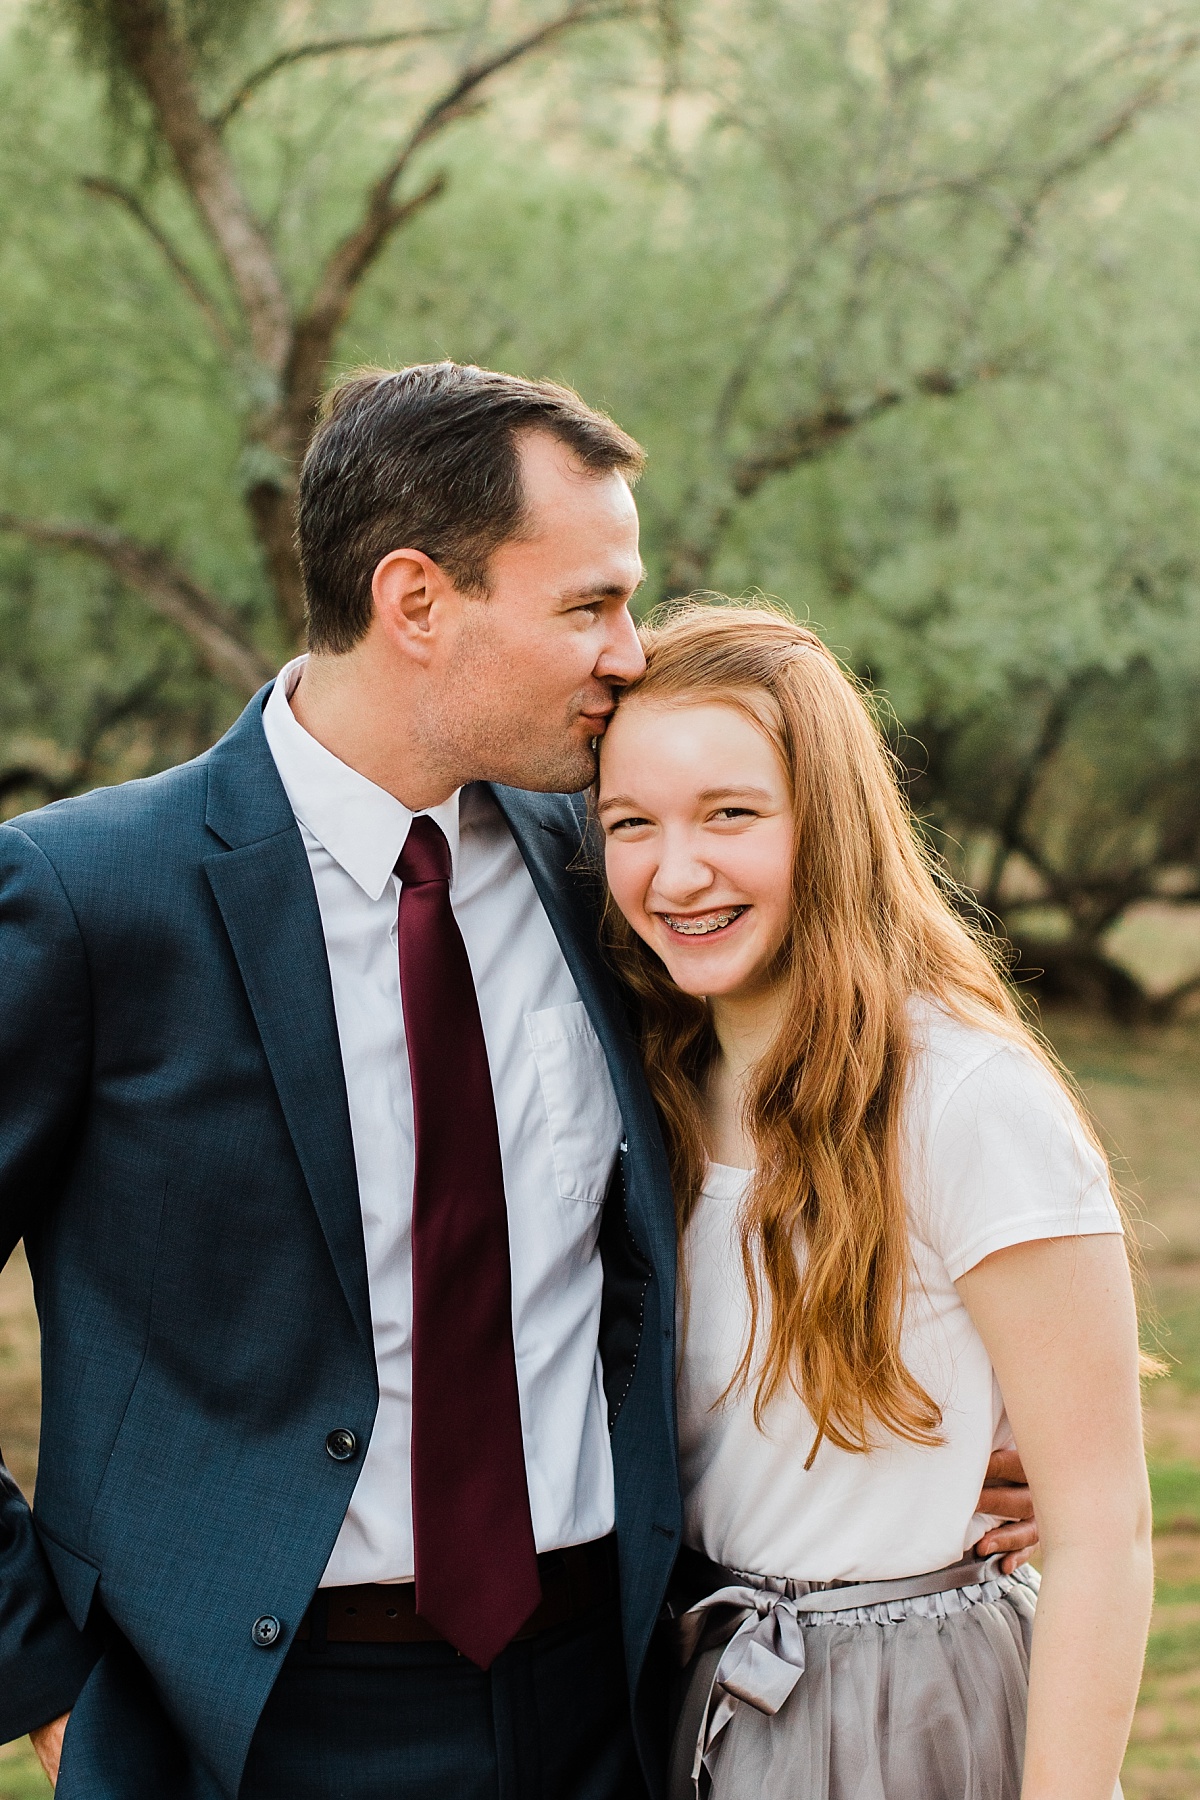 Coon Bluff Campground Family Pictures | Mesa Family Photographer